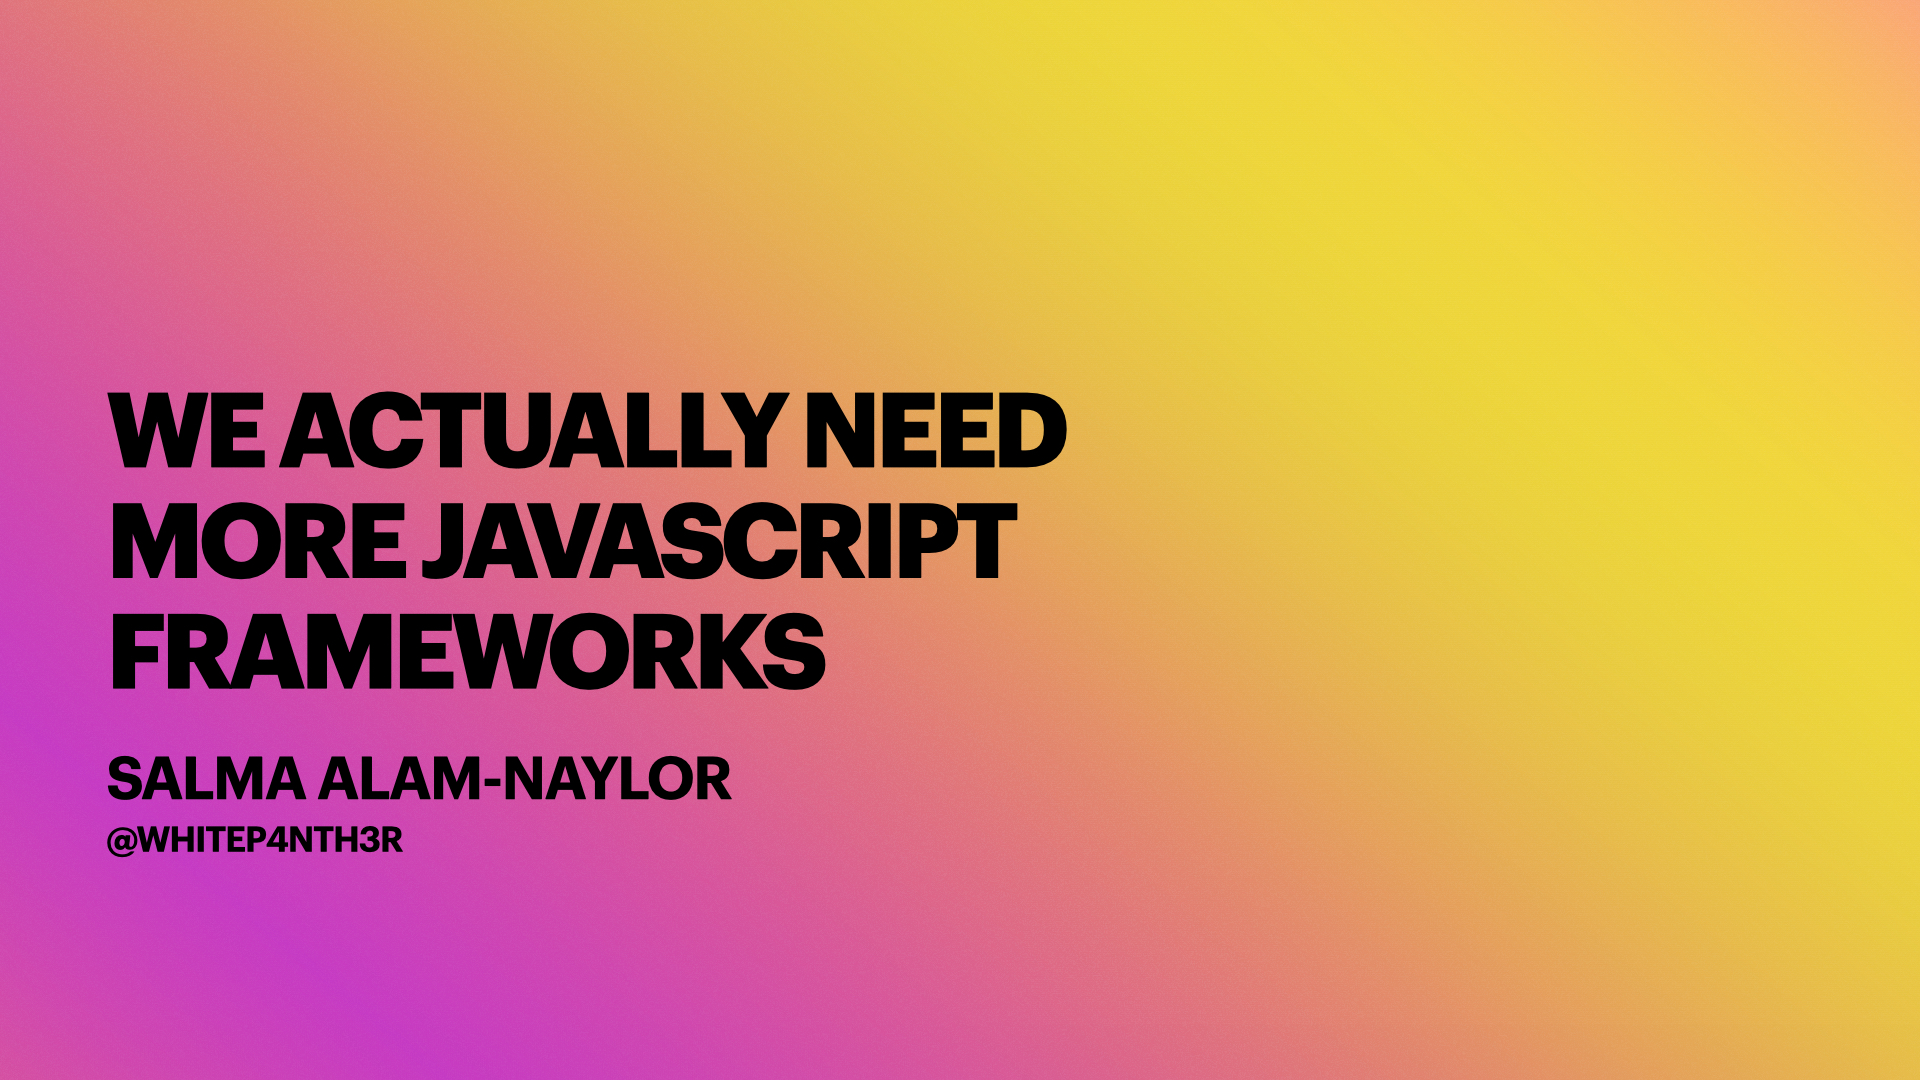 We actually need more JavaScript frameworks. Salma Alam-Naylor. whitep4nth3r. Black text on an orange, yellow and pink gradient background.